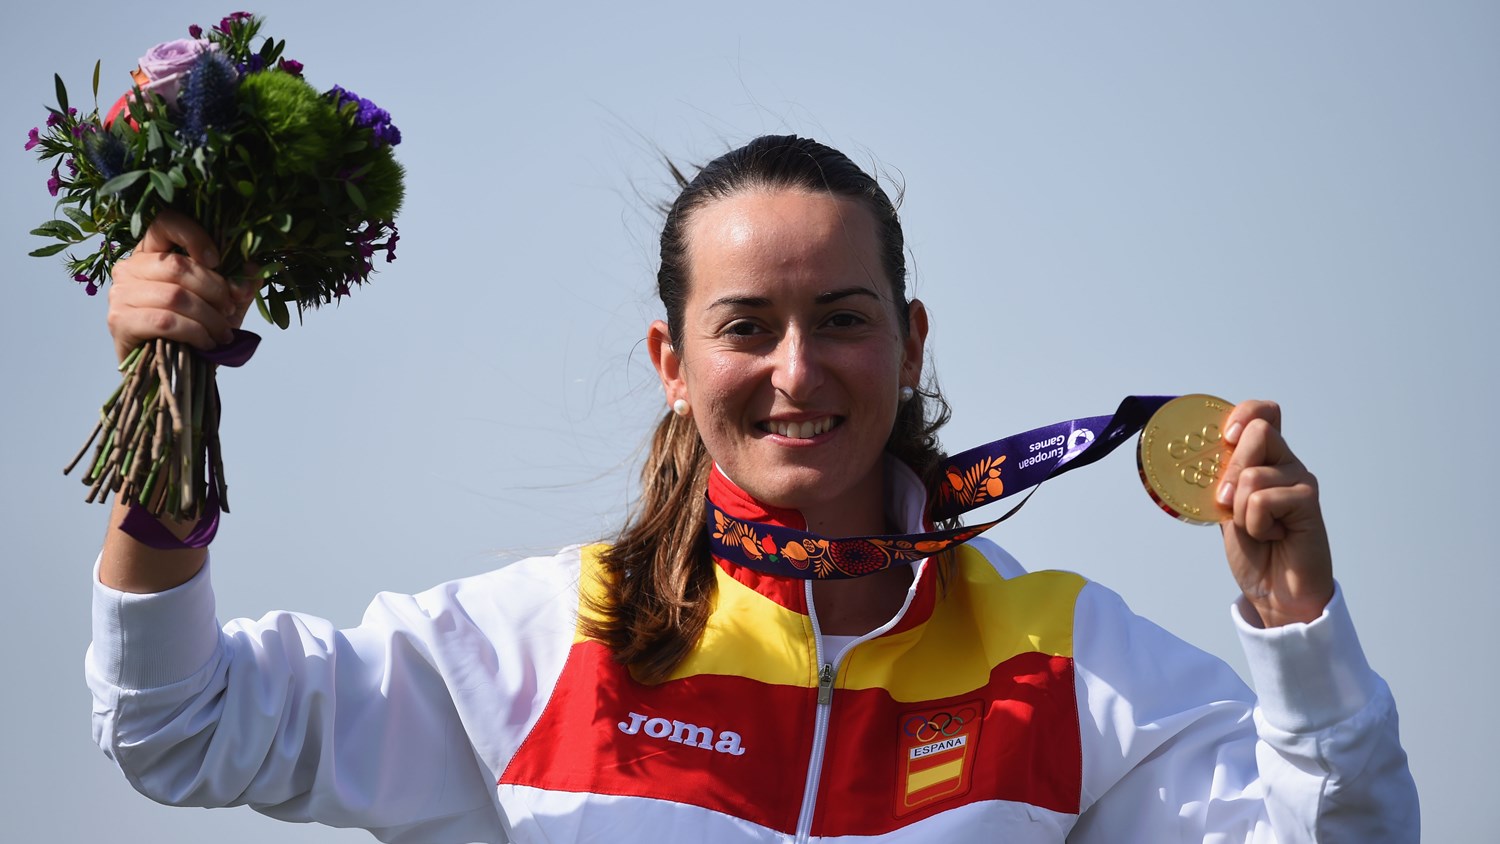 Shooter Fatima Galvez earns gold for Spain